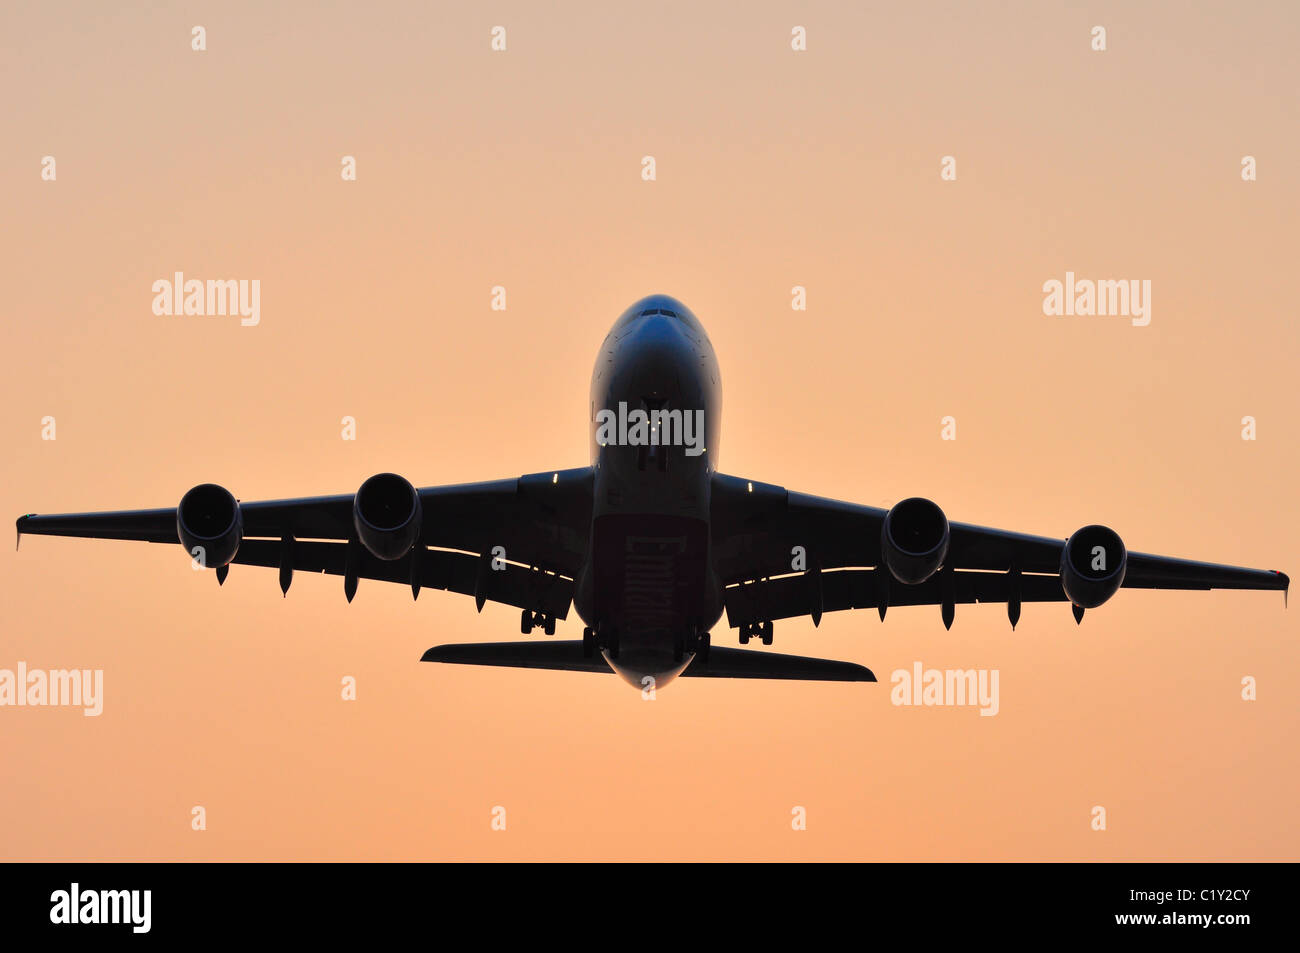 Airbus A380 Airplane coming into Land during sunset at Heathrow Airport Stock Photo